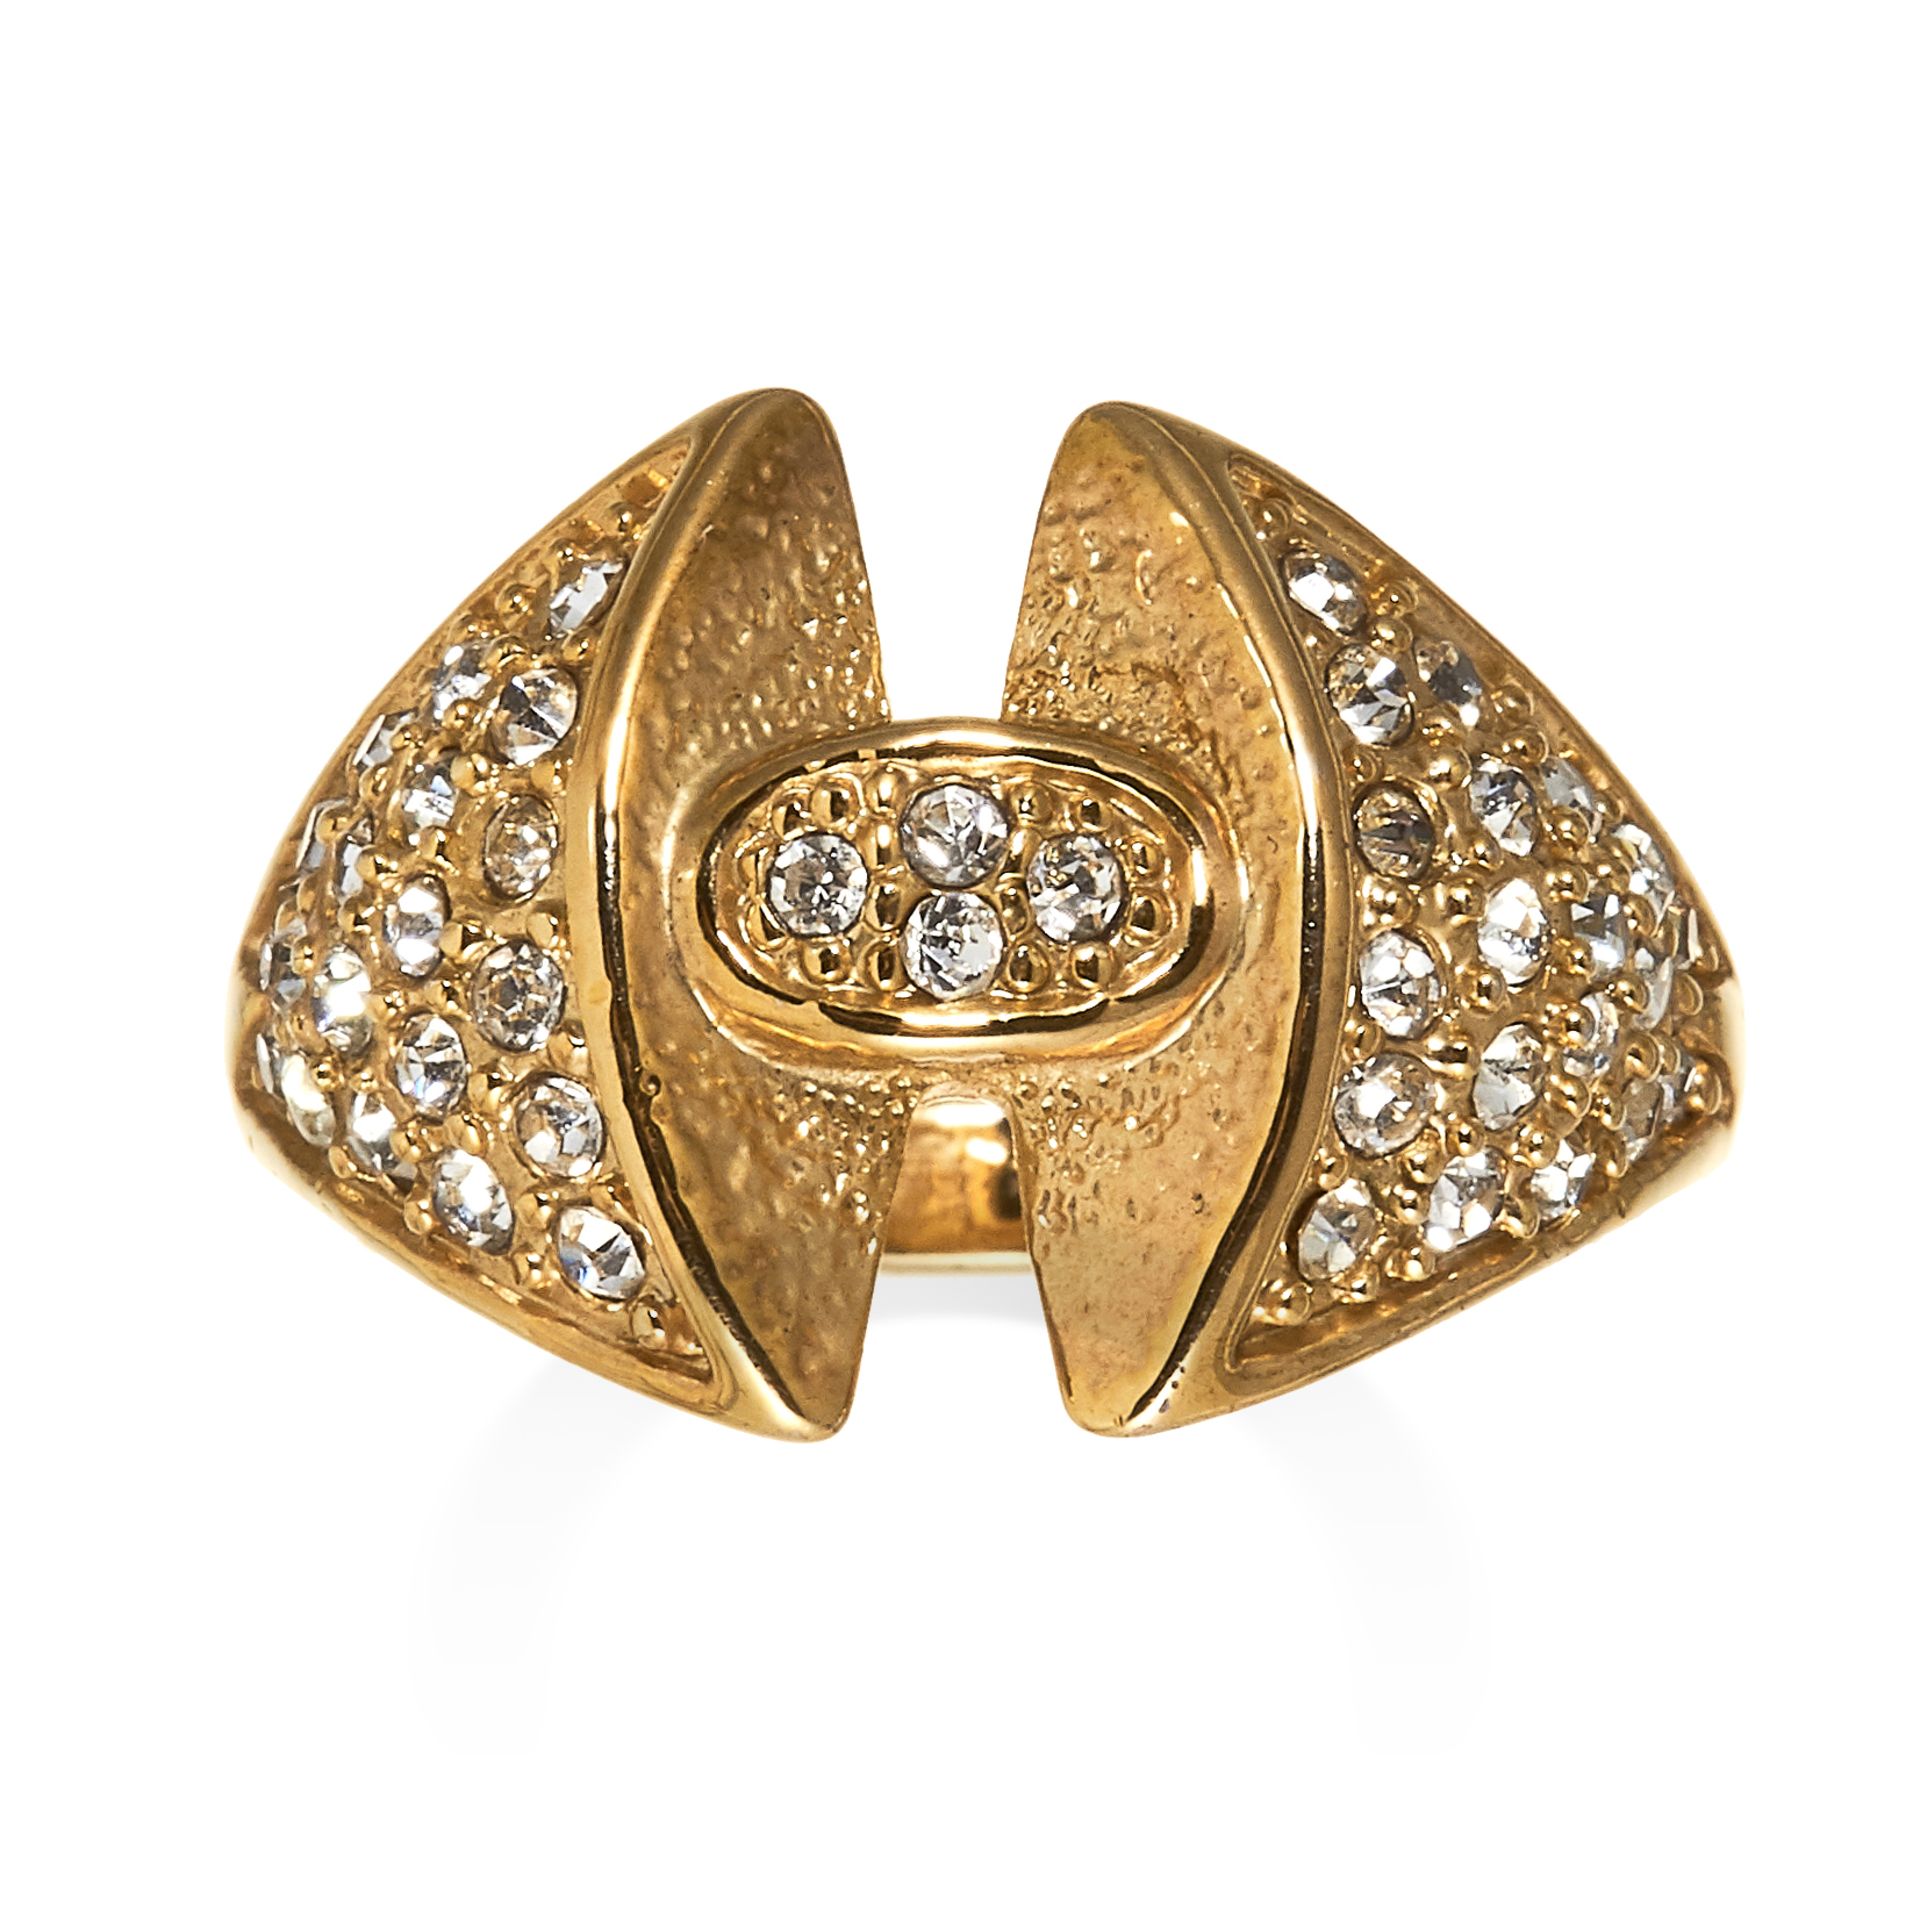 A DIAMOND DRESS RING the central oval motif set with round cut diamonds, between tapering